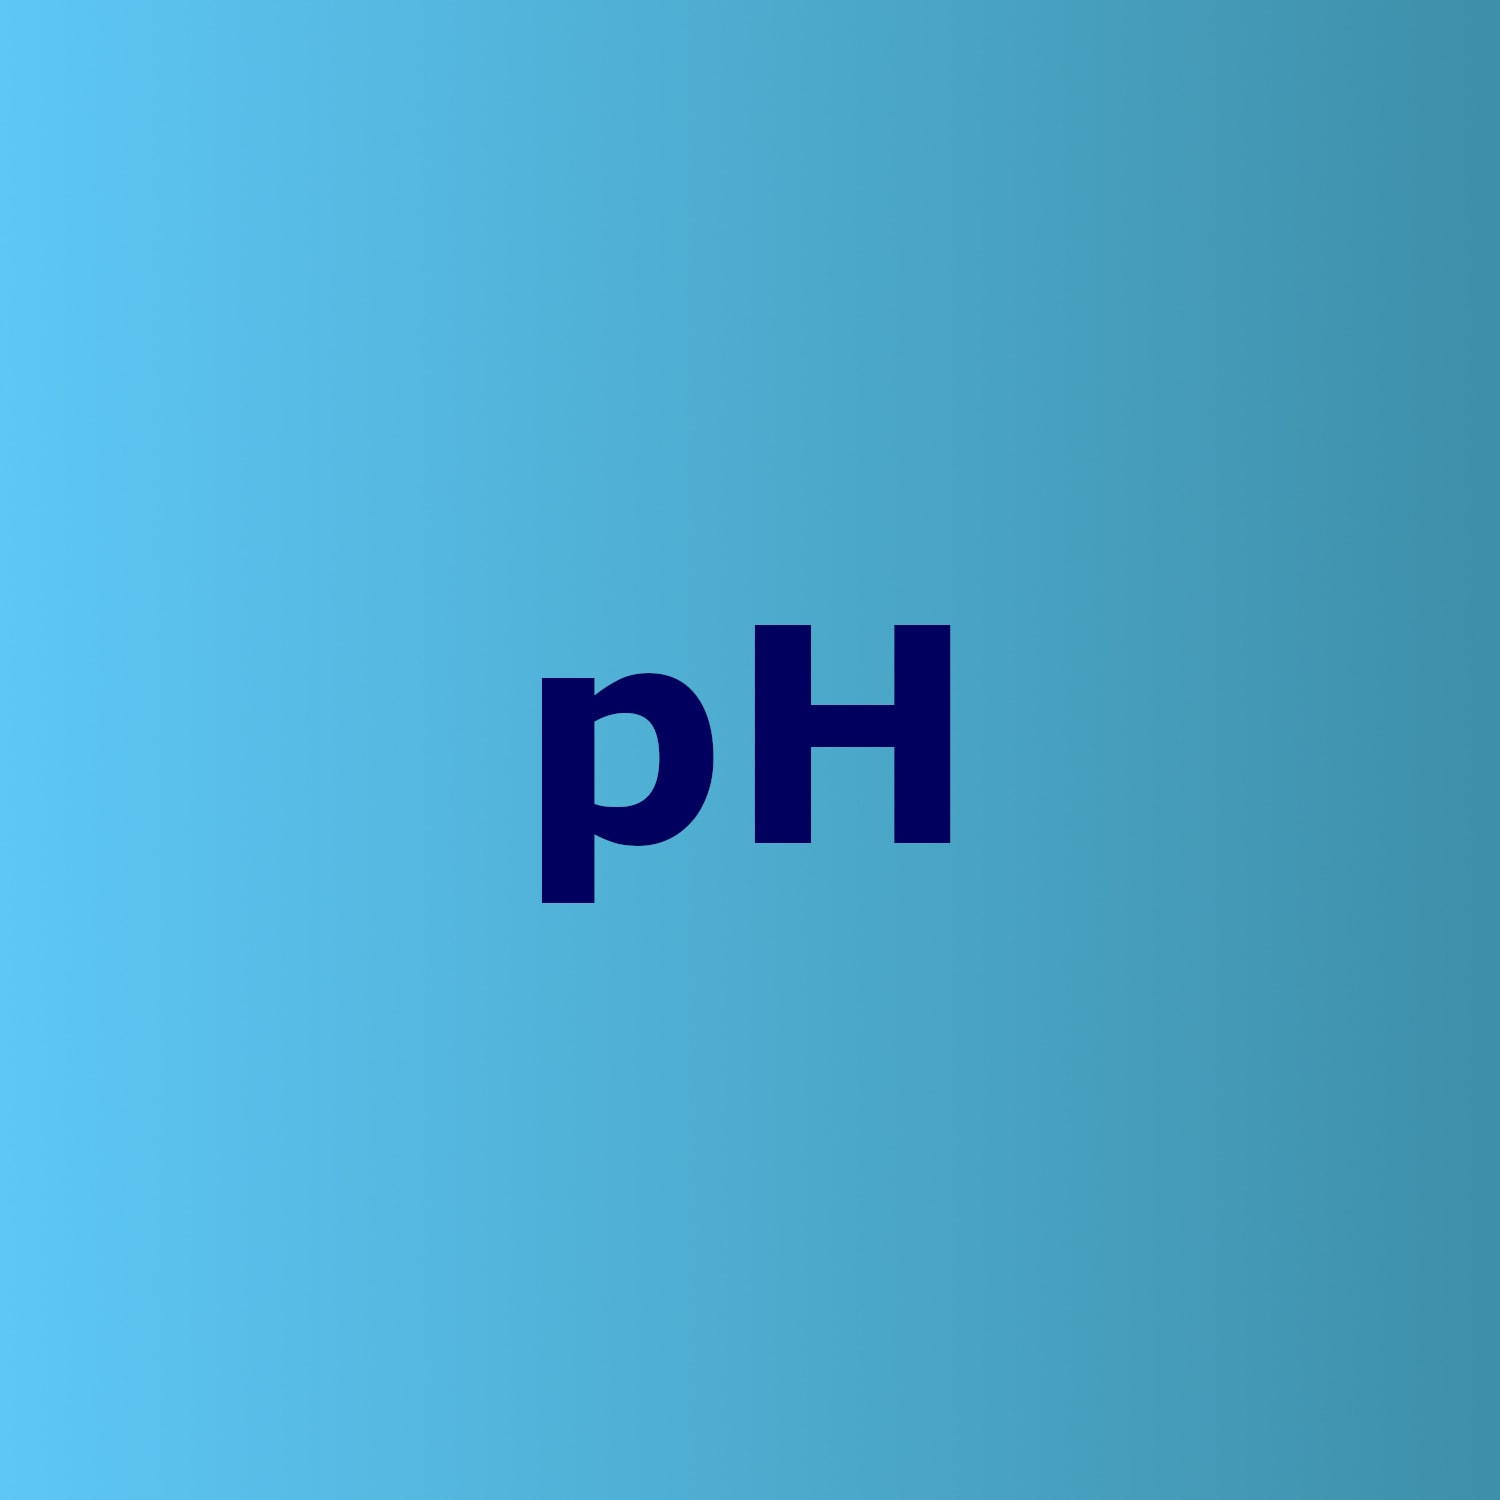 pH - potential for hydrogen